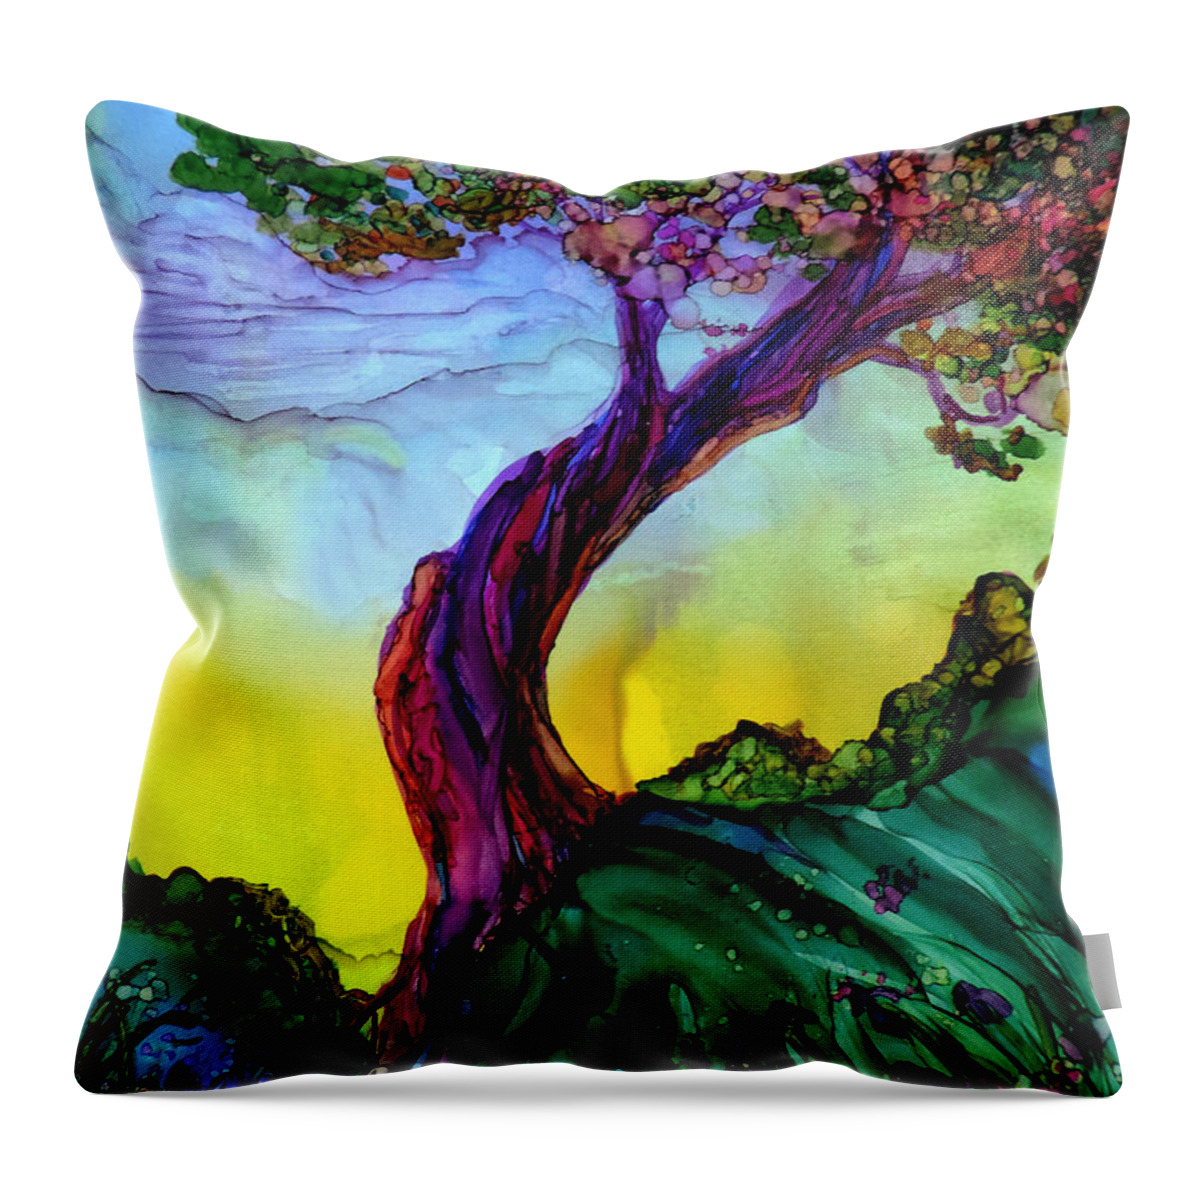 Landscape Throw Pillow featuring the painting Life is Good by Francine Dufour Jones